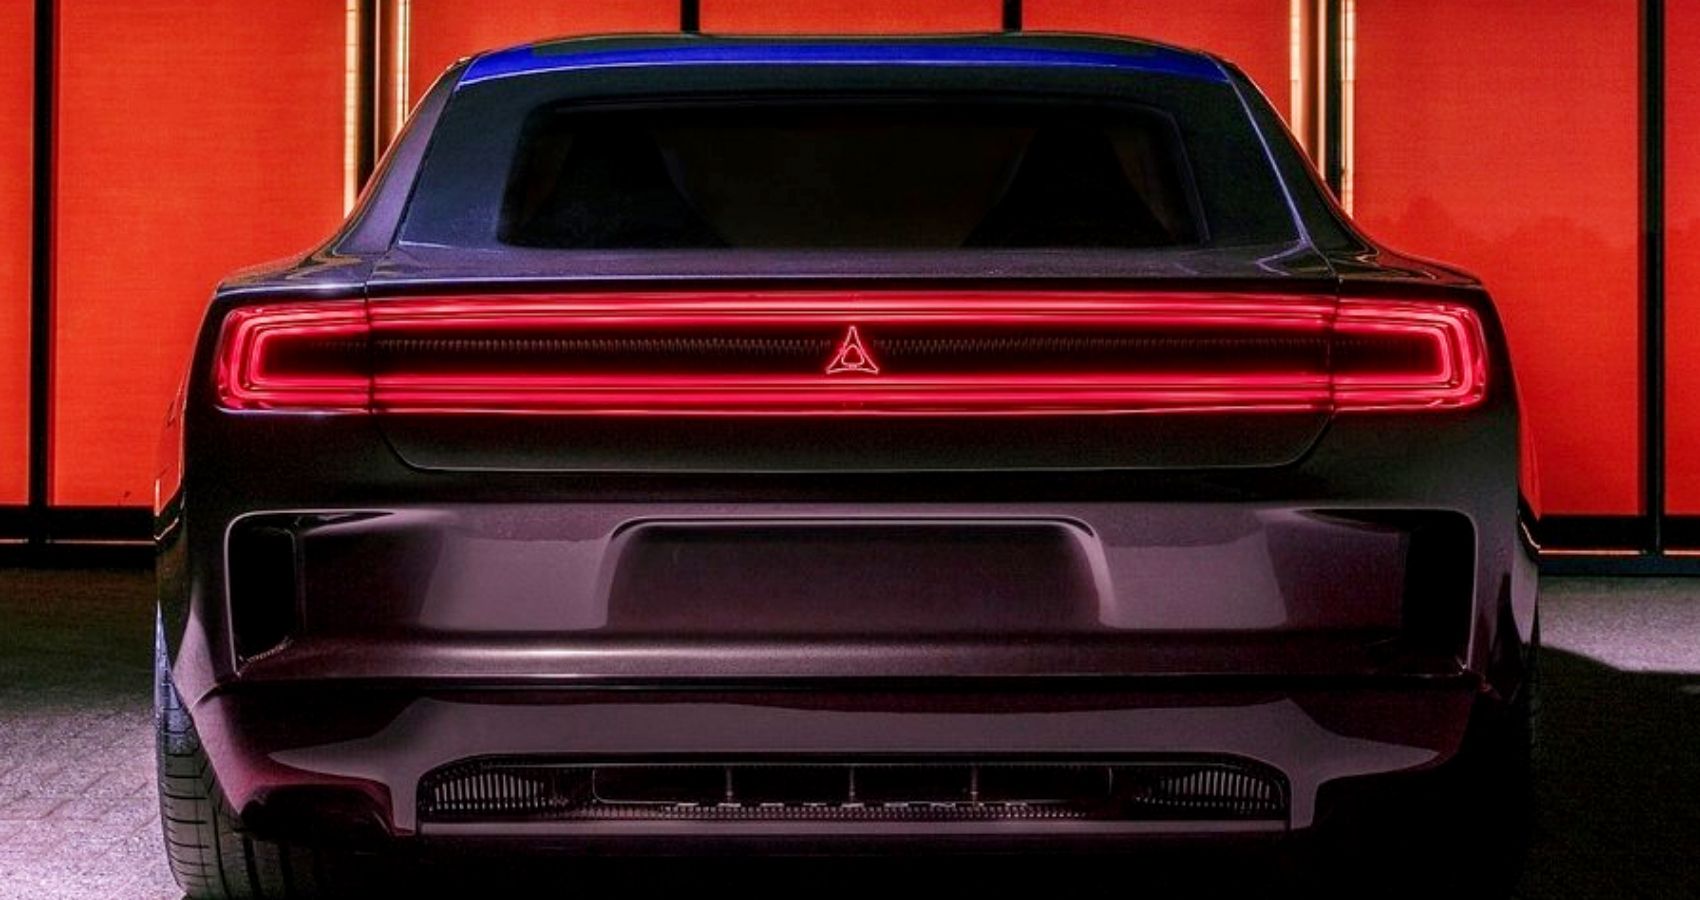 Dodge Charger Daytona SRT Rear With Exhaust And Taillamps